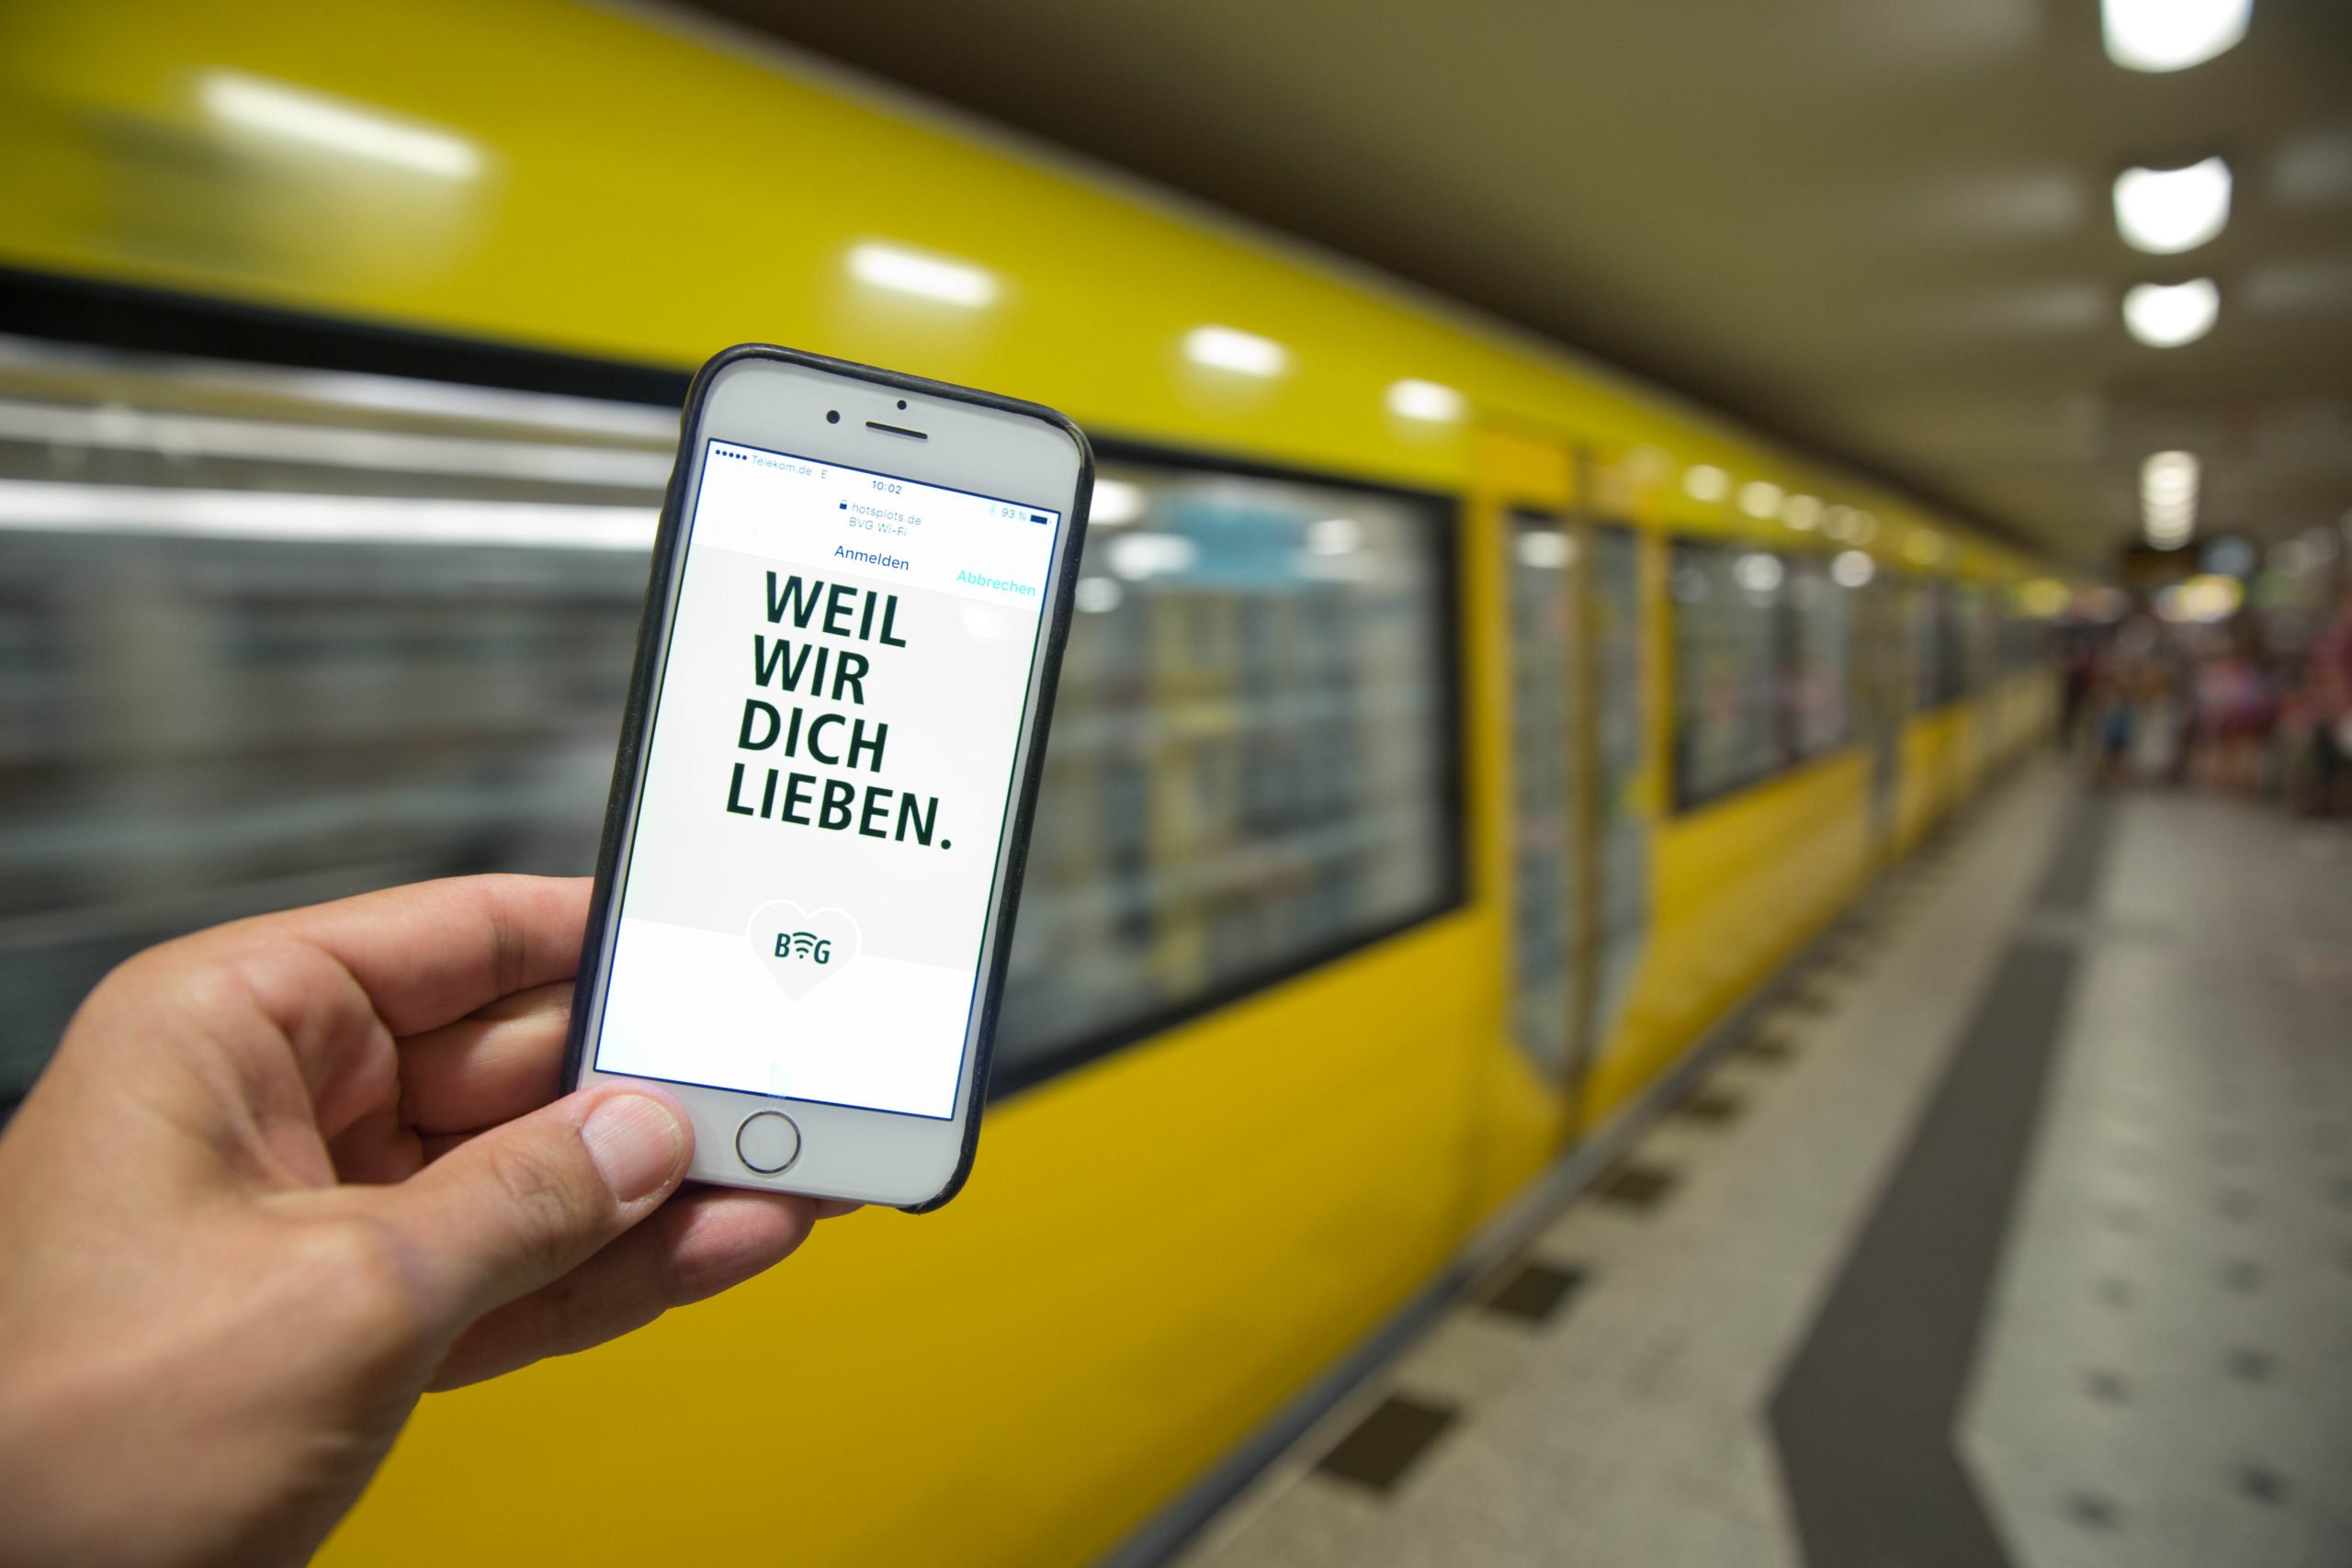 Berlin's BVG uses the informal 'du' in an advert to say "because we love you". 